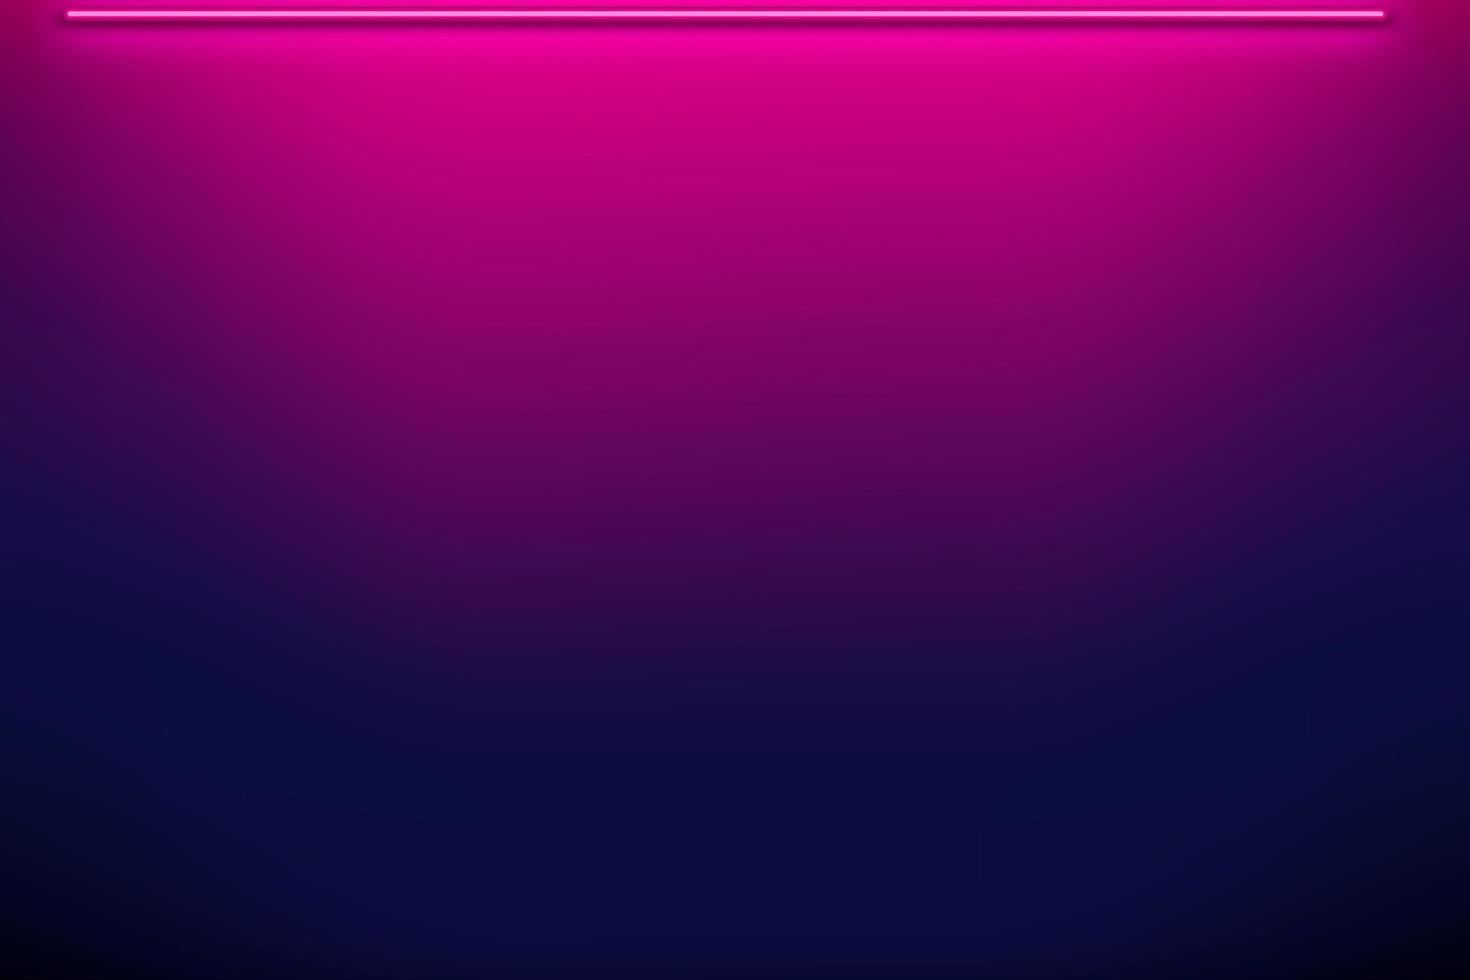 Wall in neon light background. vector